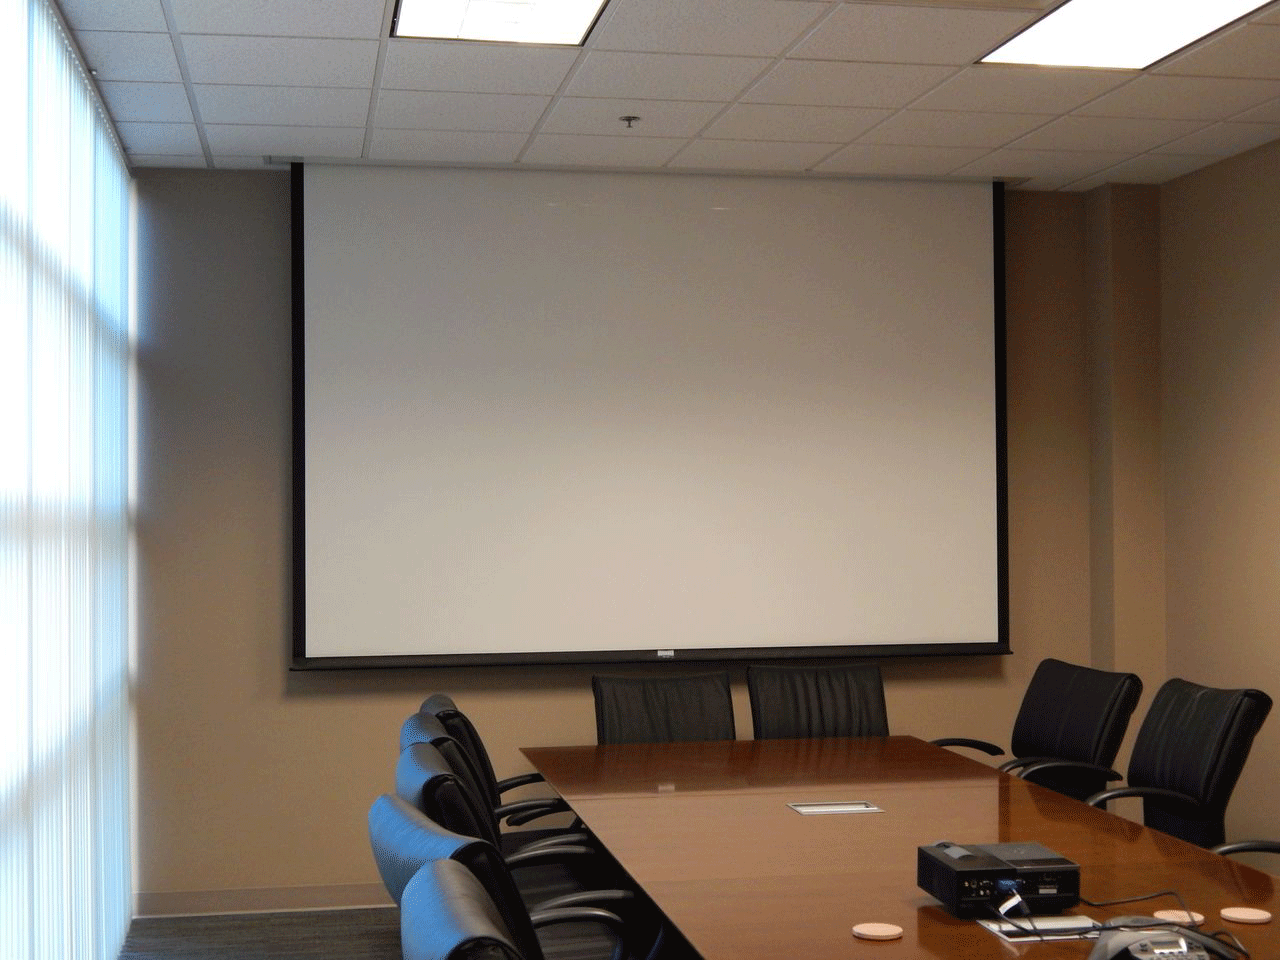 Projection Screen Material – Buyers’ Quick Guide